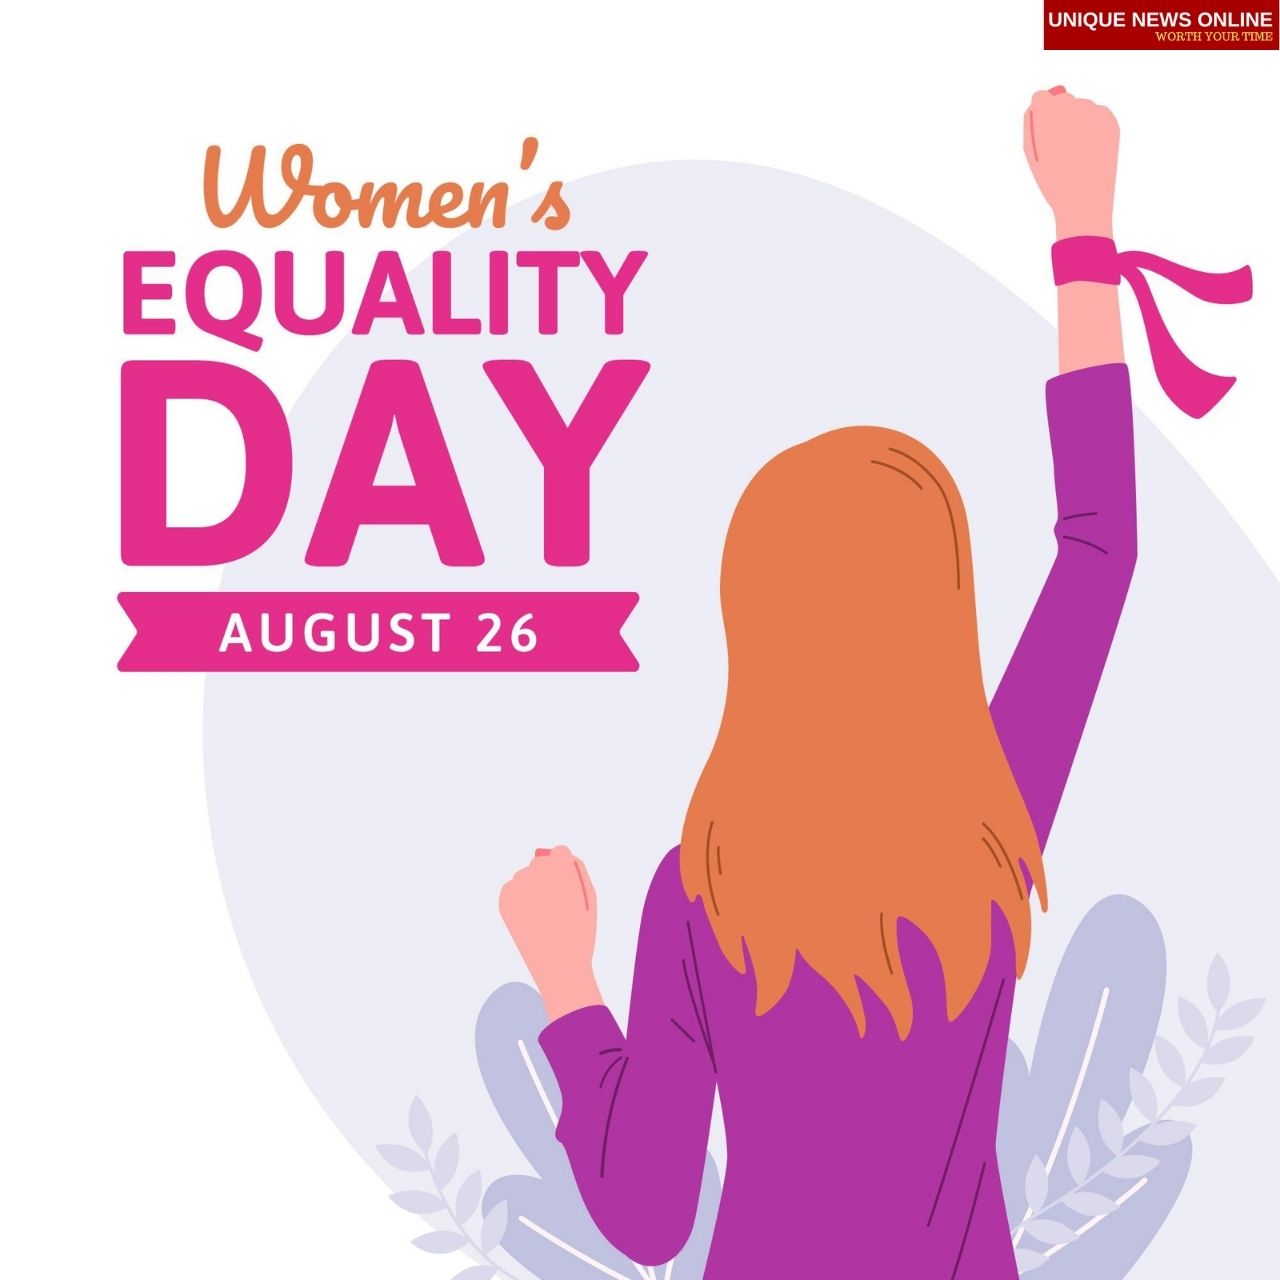 Women's Equality Day 2021 Quotes, Wishes, Images, Messages, Greetings, and HD Images for the Anniversary of 19th Amendment giving women the right to vote